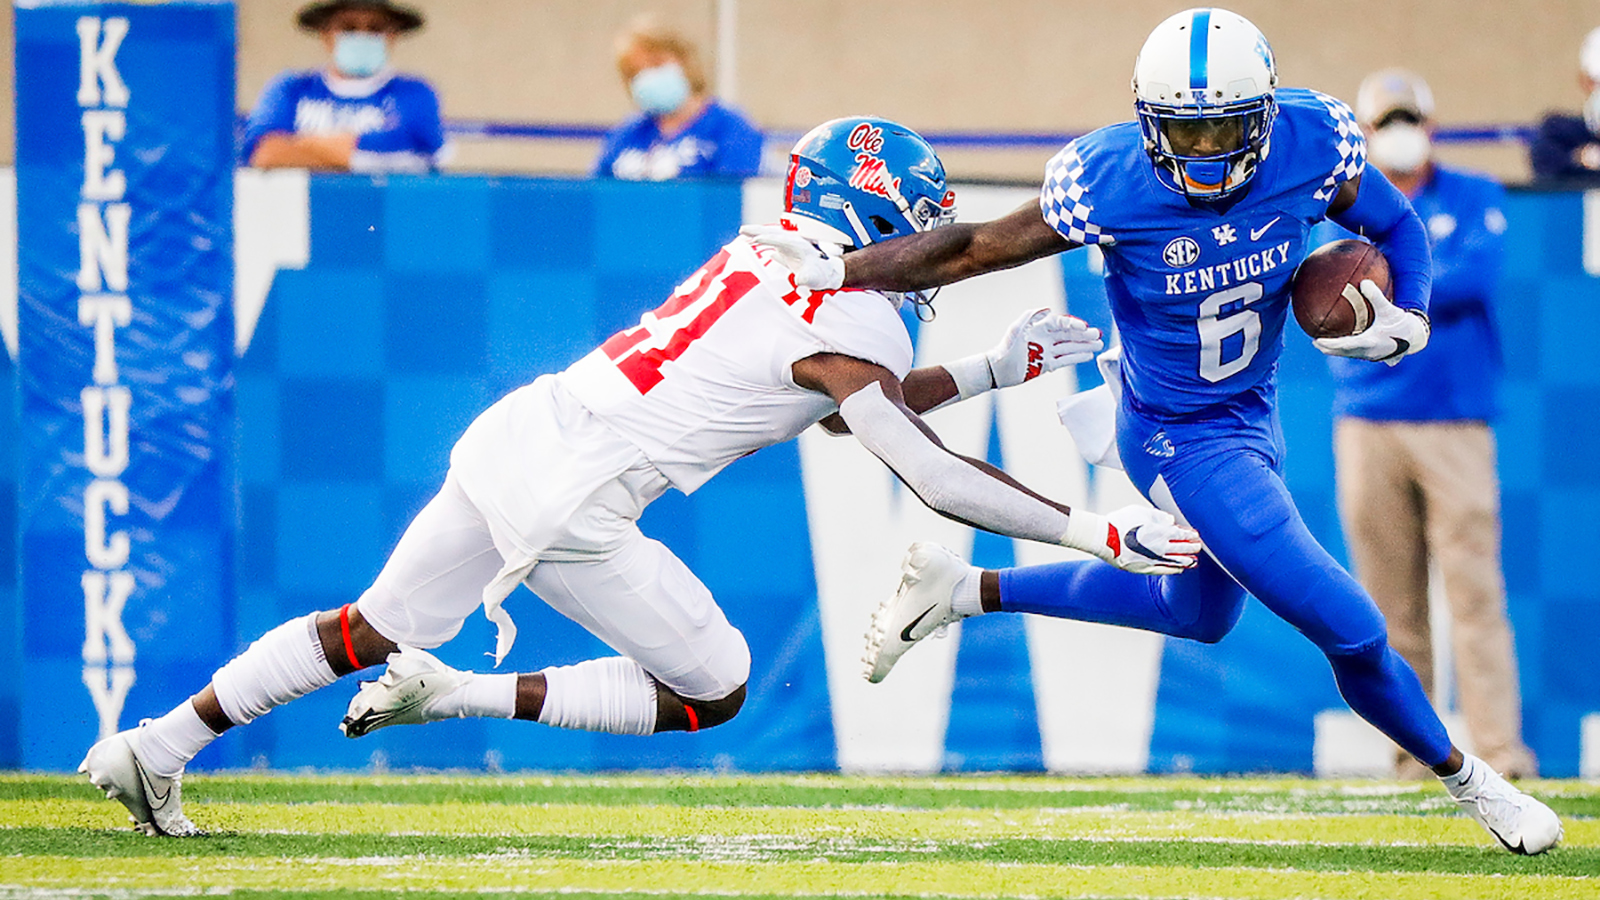 Stoops, Cats Working to Build on Positives, Fix Mistakes